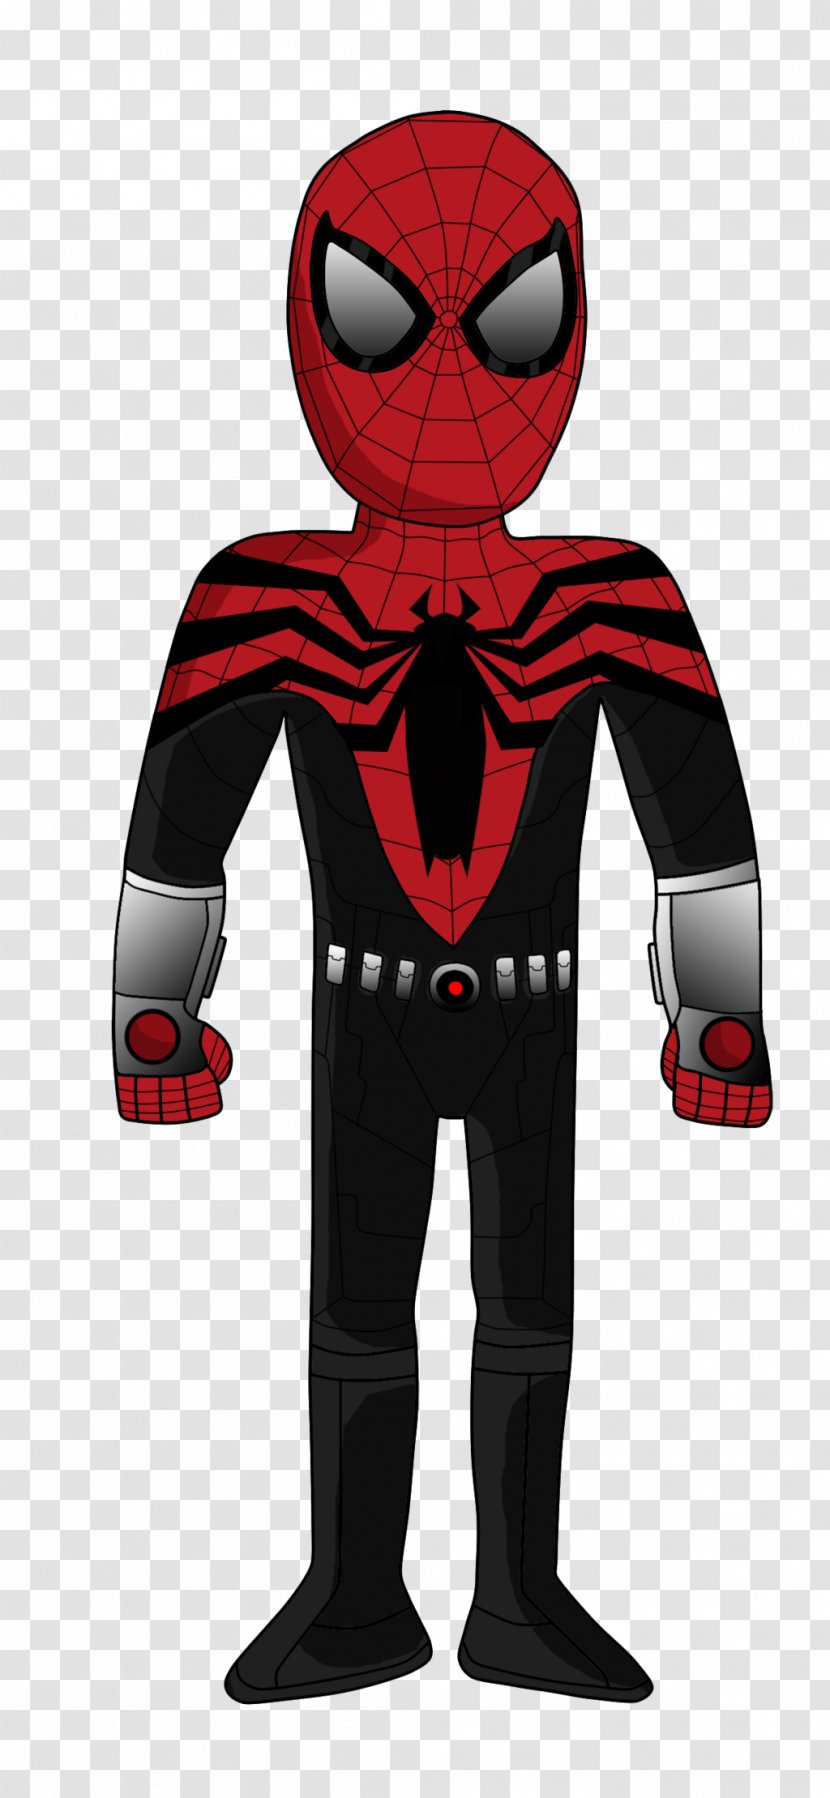 The Superior Spider-Man Costume Spider-Man: Homecoming Film Series Ultimate - Suit - Spider-man Transparent PNG